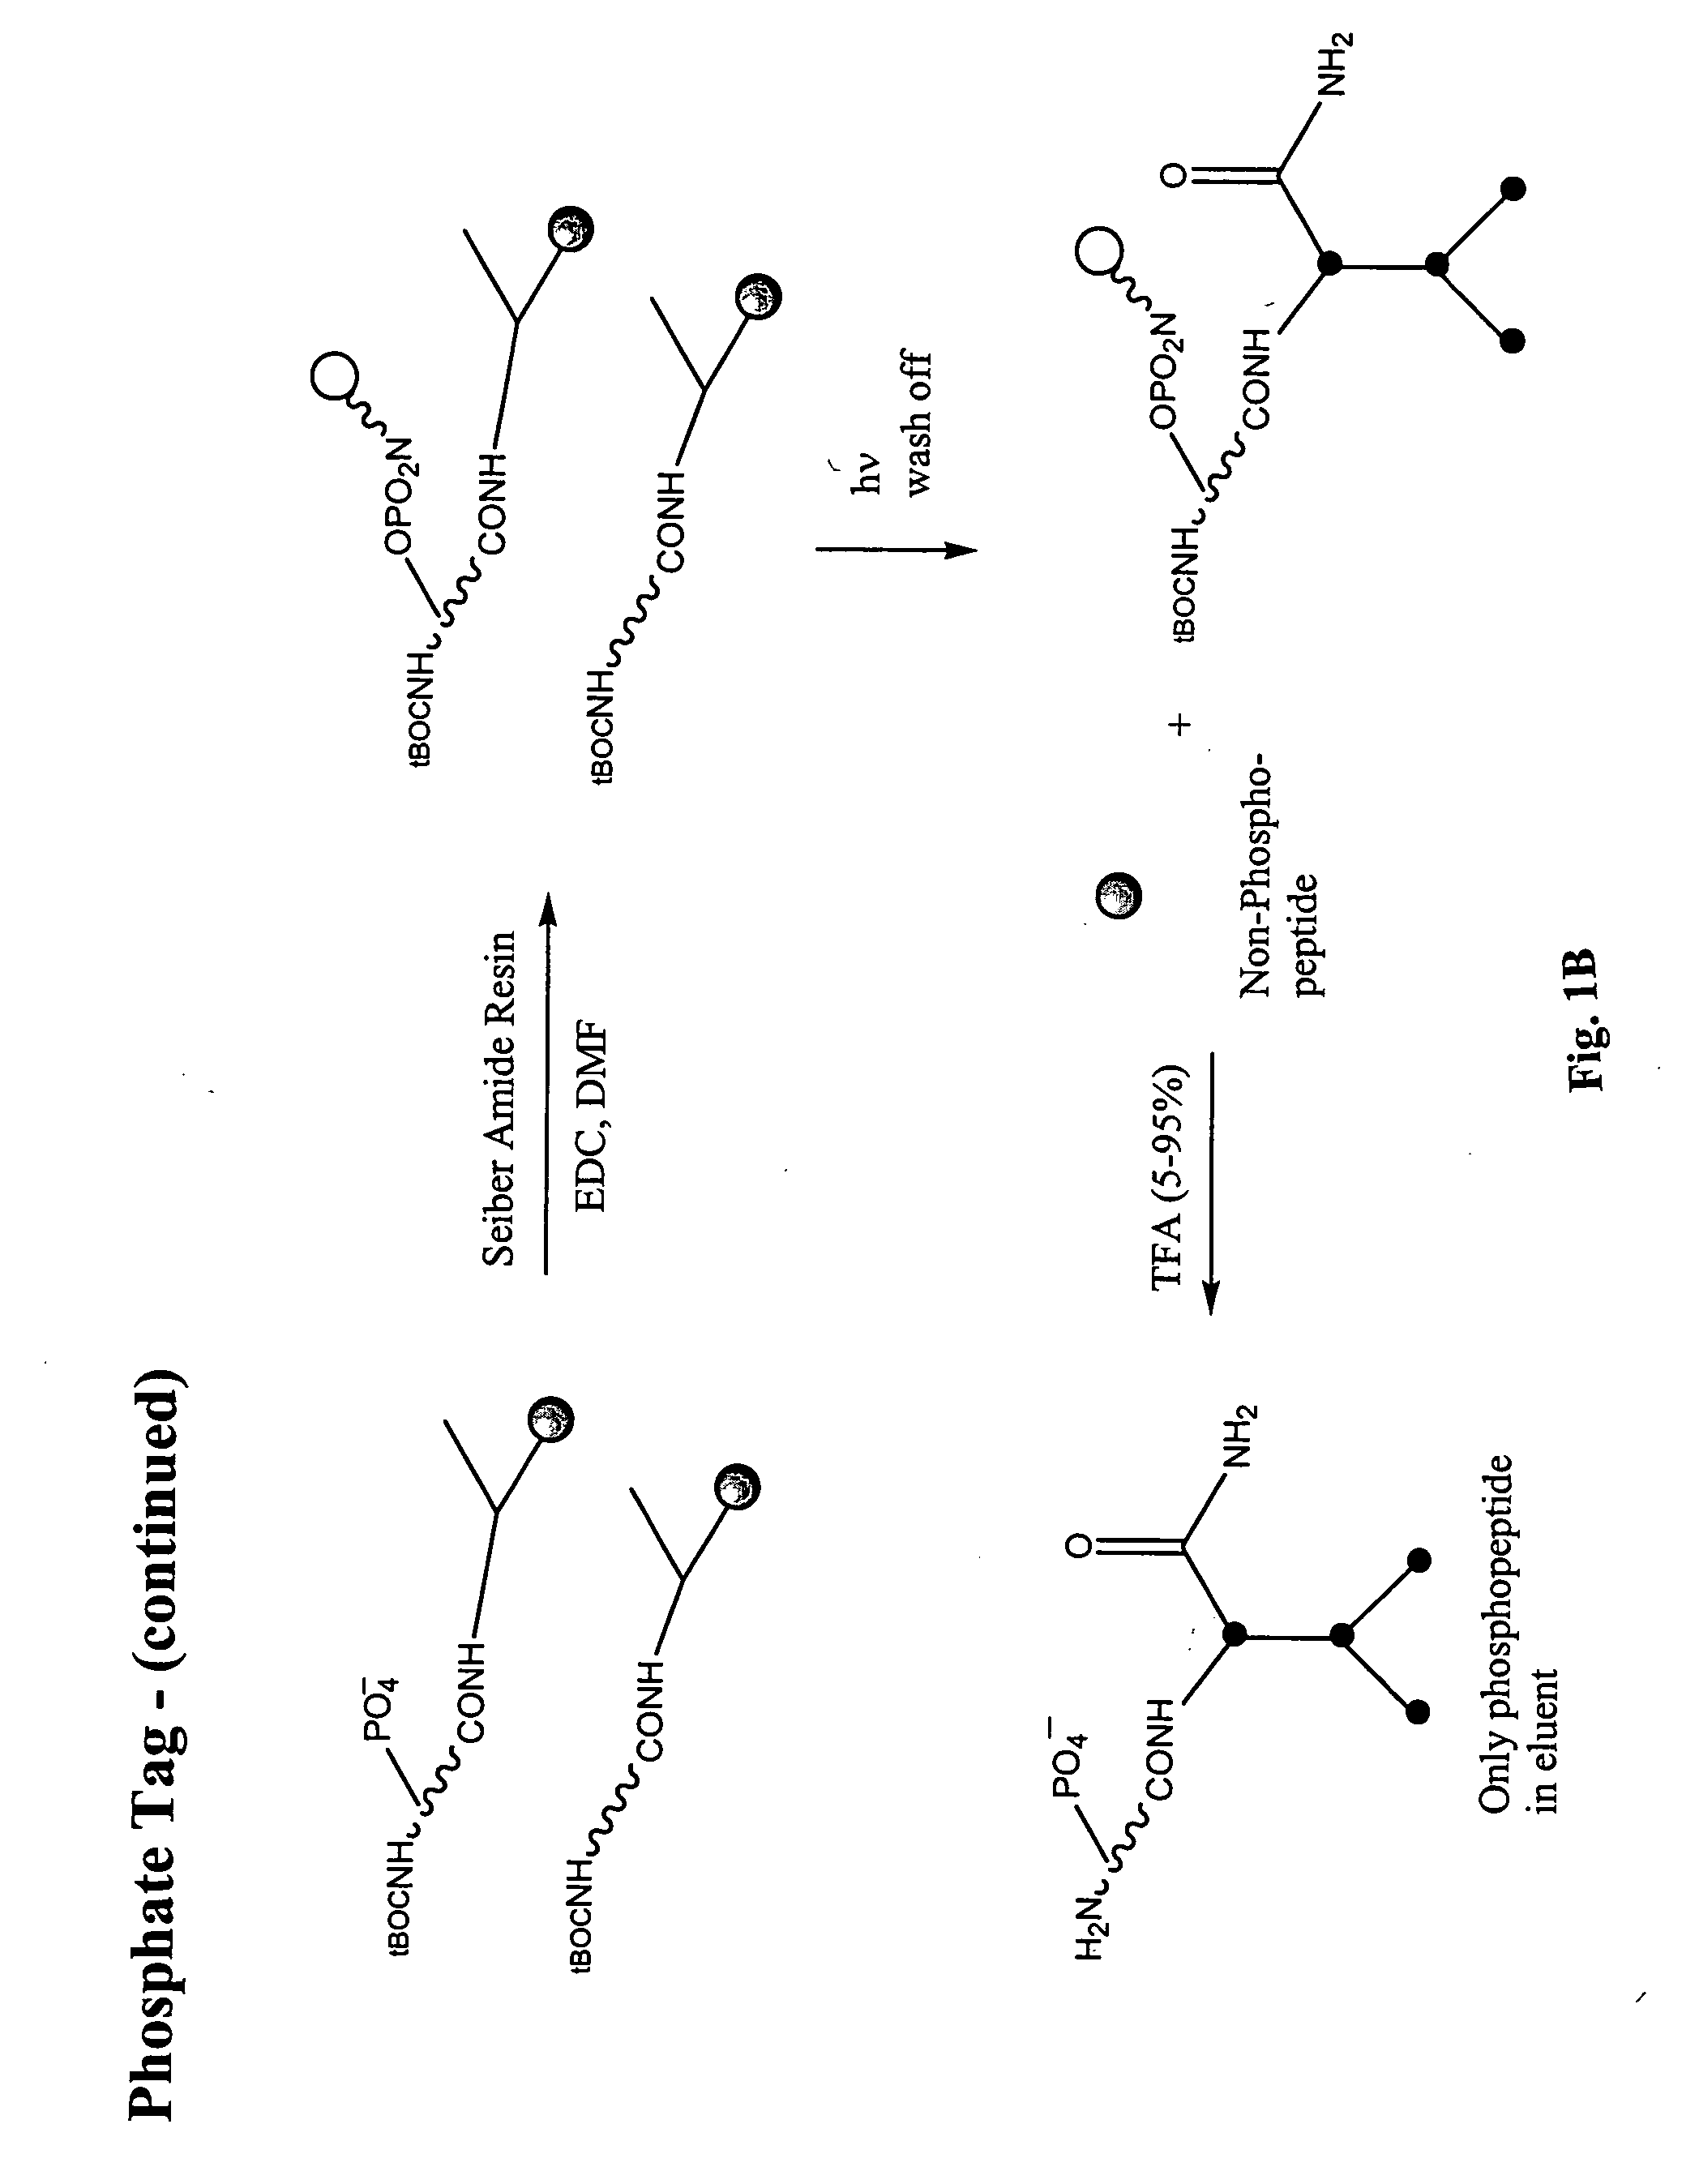 Enrichment of phosphate peptides for proteomic analysis